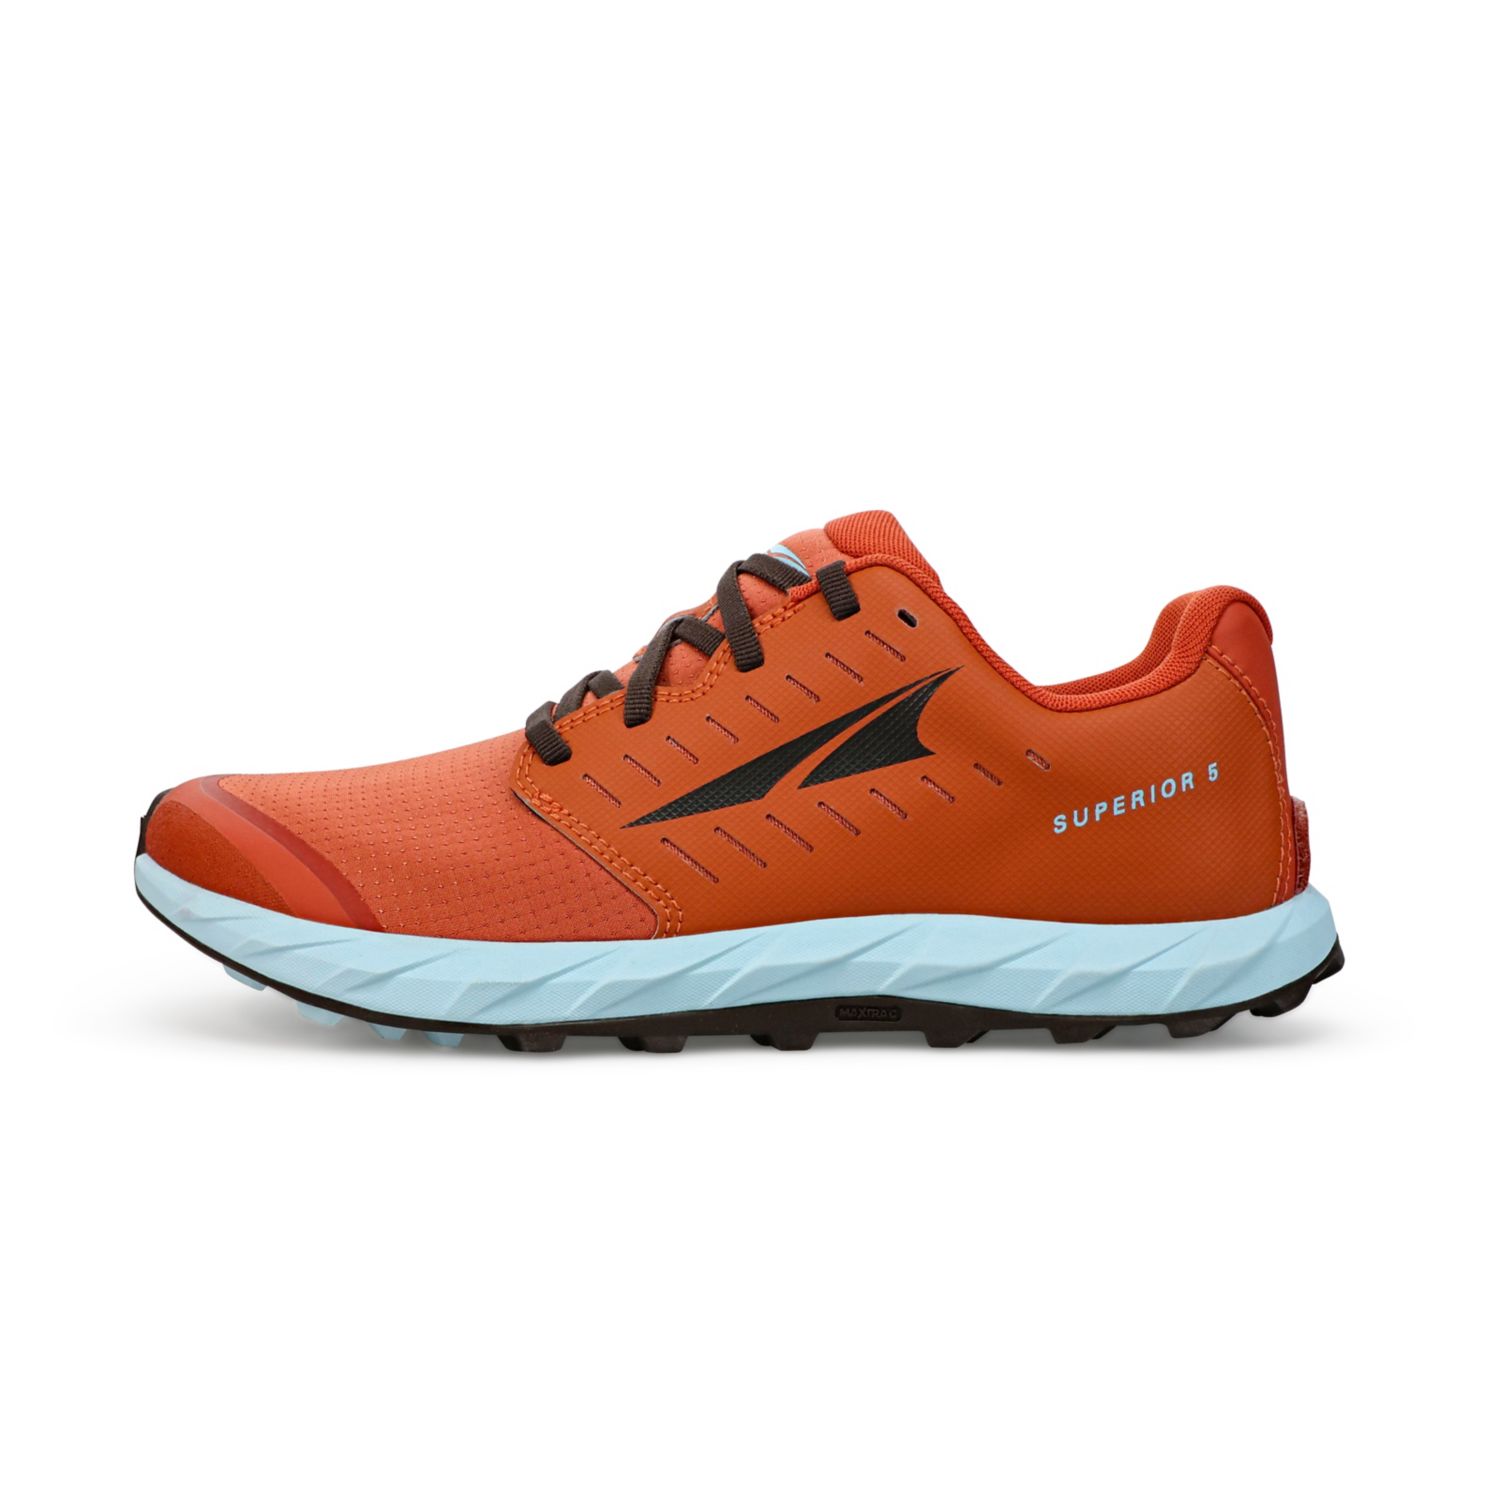 Red Altra Superior 5 Women's Trail Running Shoes | Ireland-83092479